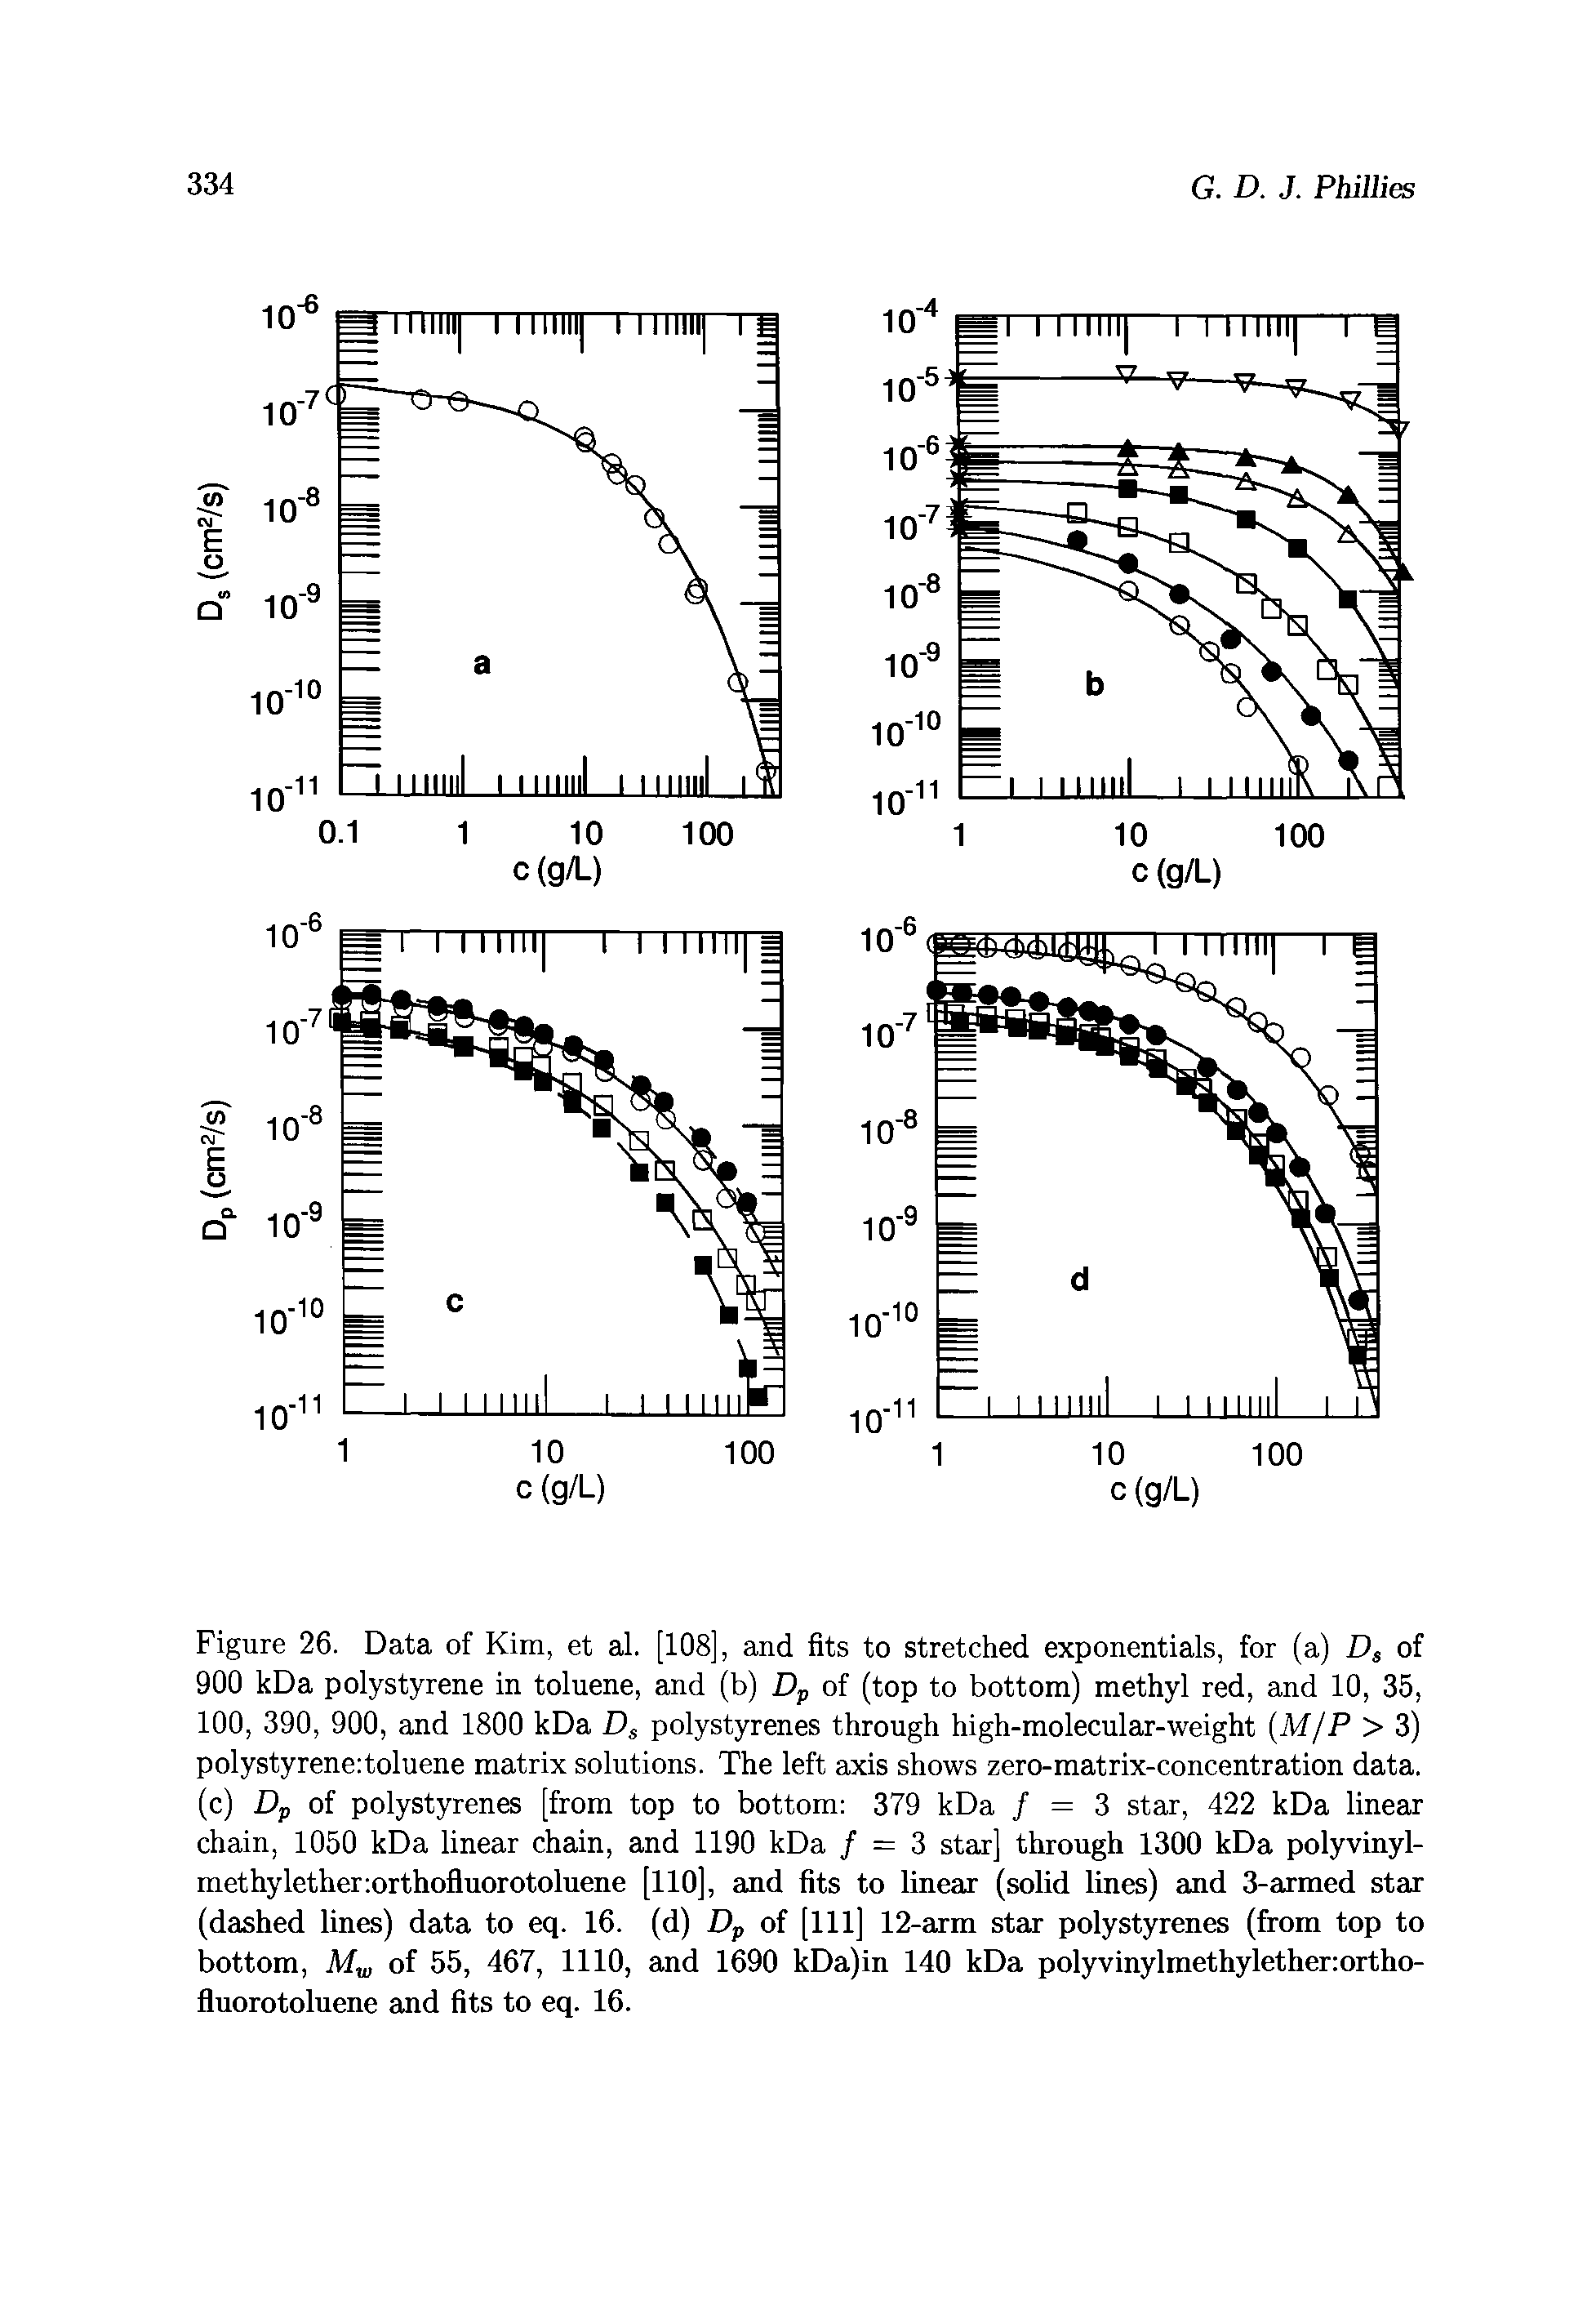 Figure 26. Data of Kim, et aJ. [108], and fits to stretched exponentials, for (a) D of 900 kDa polystyrene in toluene, and (b) Dp of (top to bottom) methyl red, and 10, 35, 100, 390, 900, and 1800 kDa Dg polystyrenes through high-molecular-weight M/P > 3) polystyrene toluene matrix solutions. The left axis shows zero-matrix-concentration data, (c) Dp of polystyrenes [from top to bottom 379 kDa / = 3 star, 422 kDa linear chain, 1050 kDa linear chain, and 1190 kDa / = 3 star] through 1300 kDa polyvinyl-methylether orthofluorotoluene [110], and fits to linear (solid lines) and 3-armed star (dashed lines) data to eq. 16. (d) Dp of [111] 12-arm star polystyrenes (from top to bottom, of 55, 467, 1110, and 1690 kDa)in 140 kDa polyvinylmethylether ortho-fluorotoluene and fits to eq. 16.